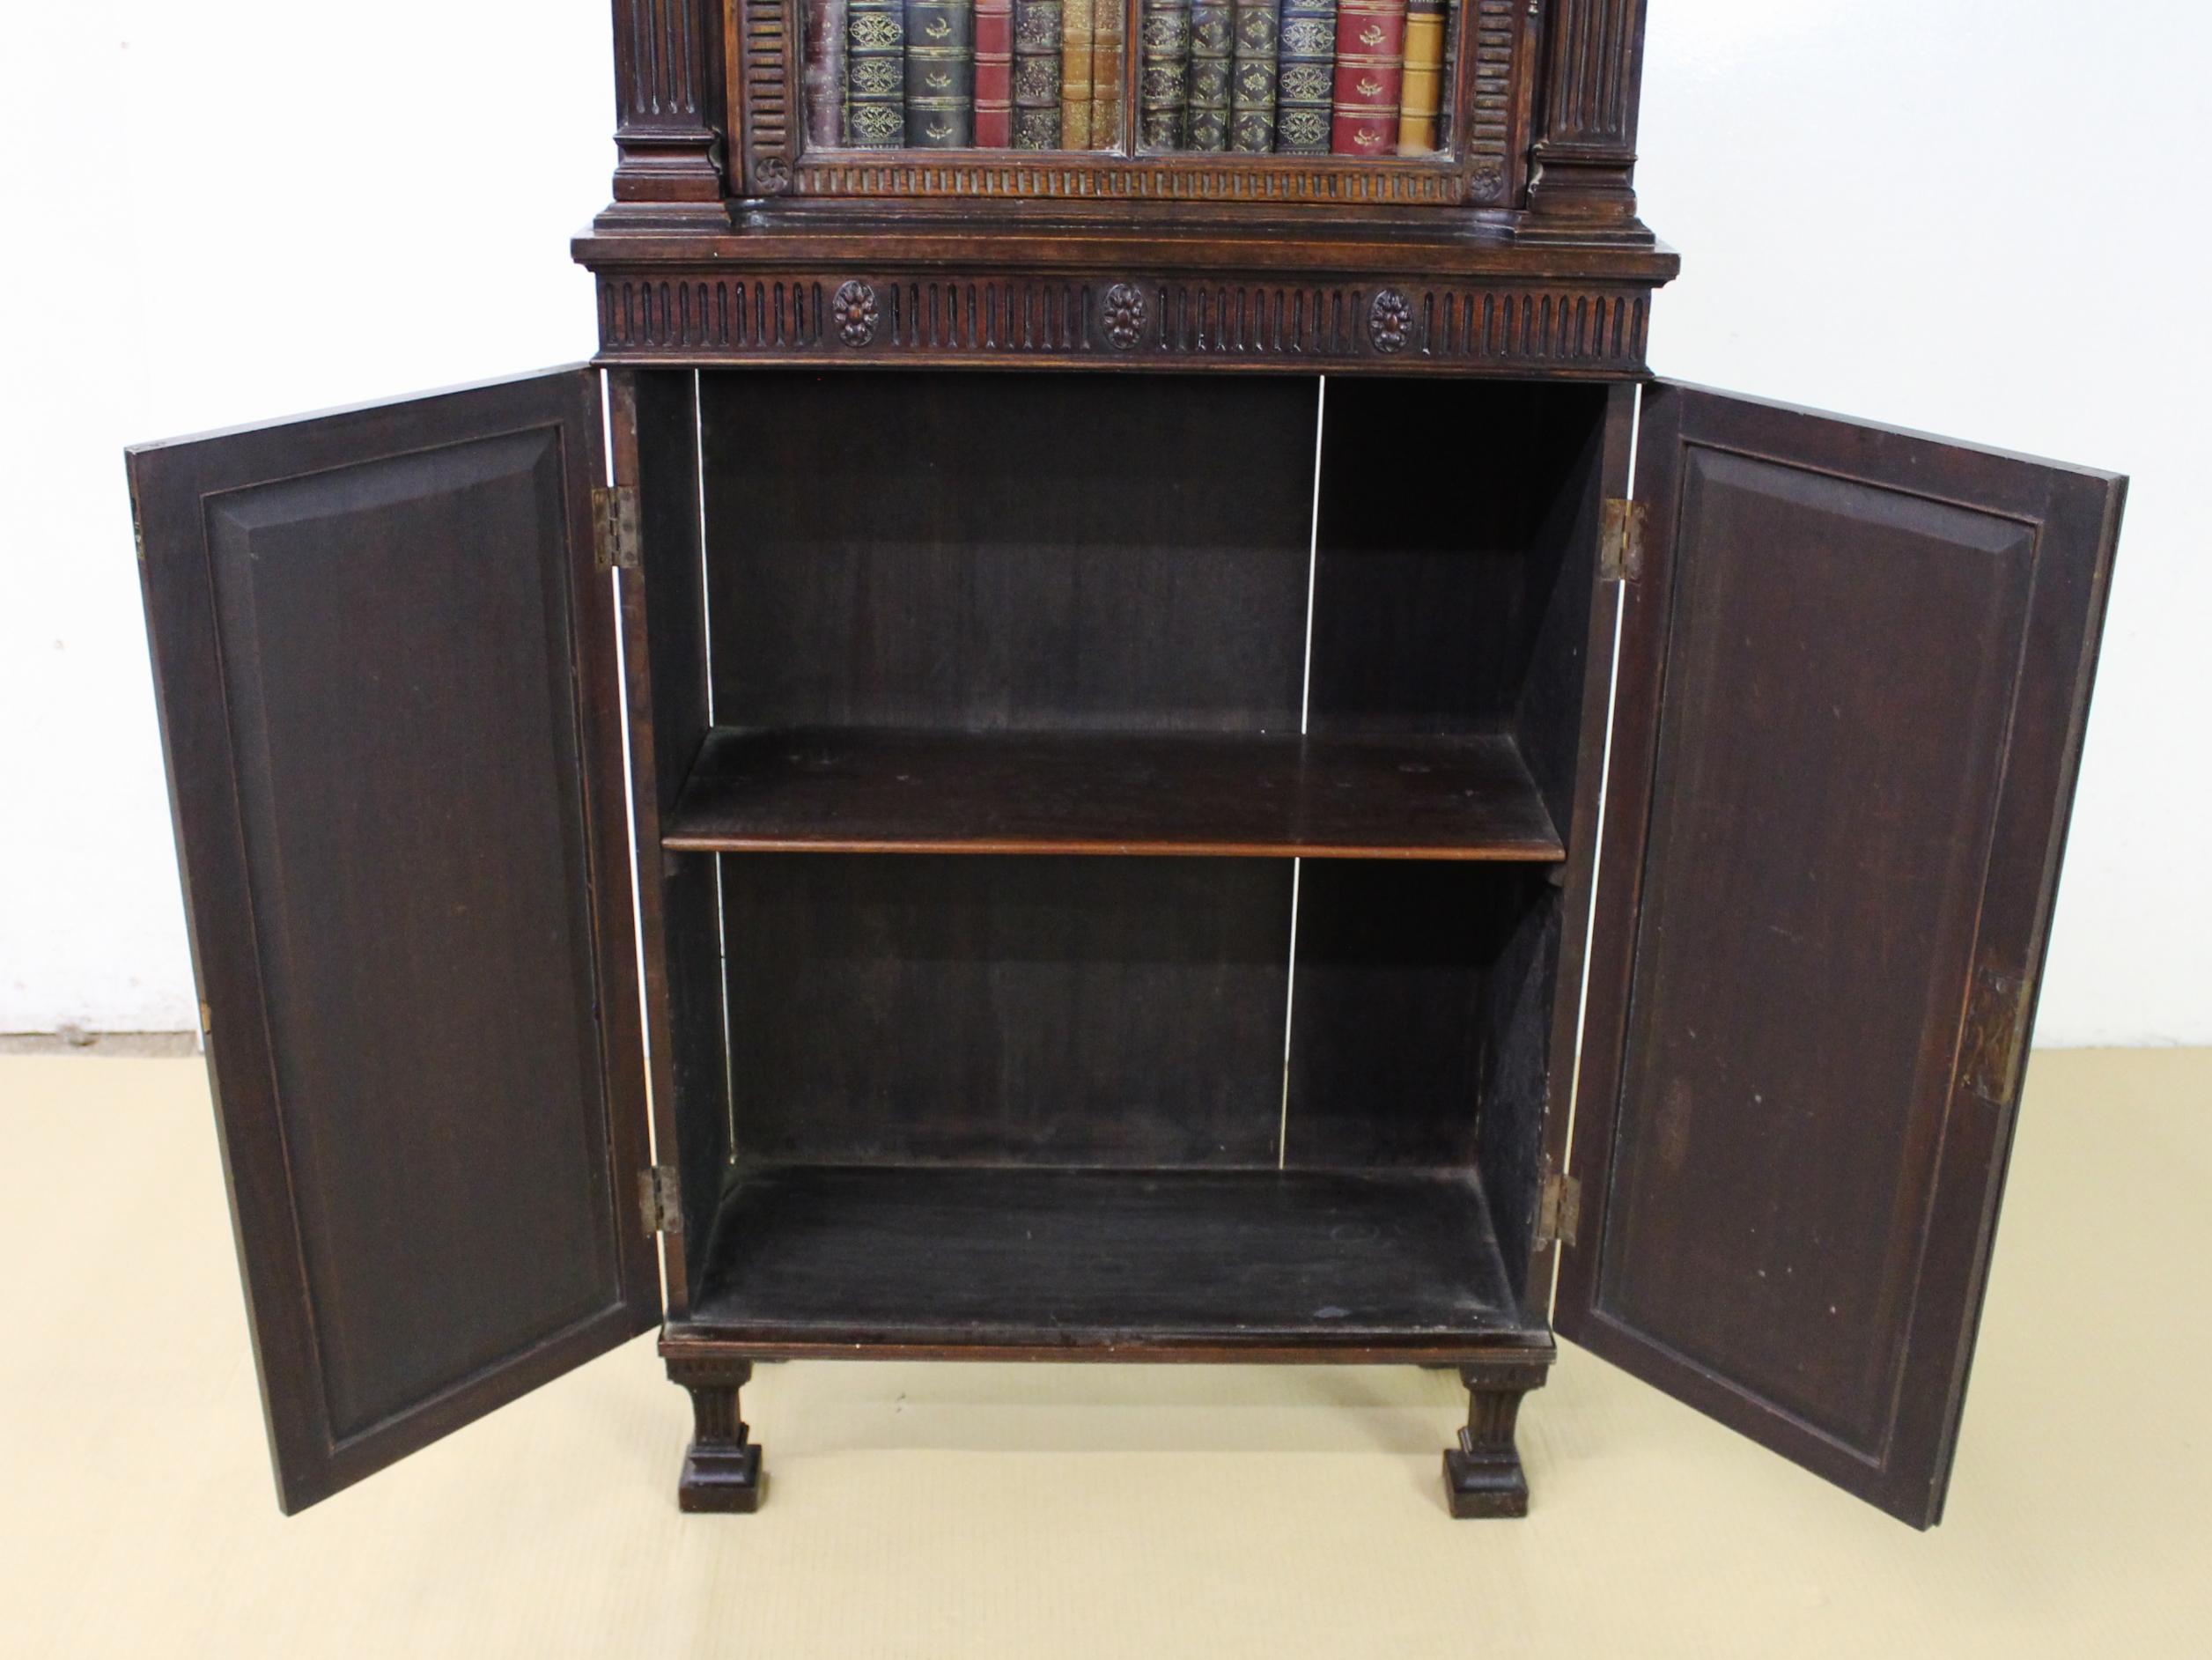 Edwardian Period Adams Style Slender Mahogany Bookcase For Sale 9